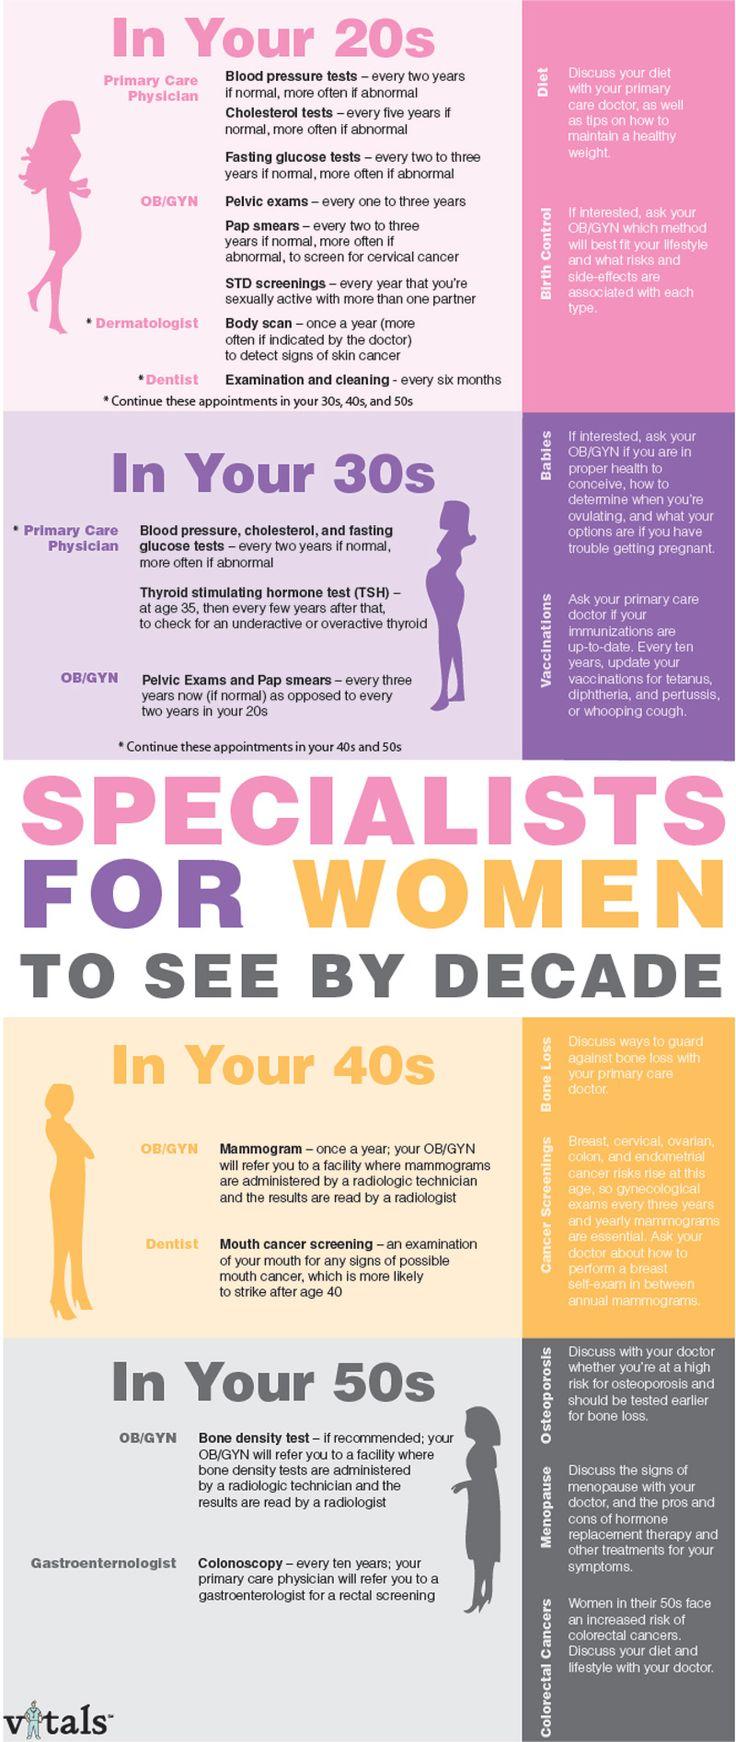 Hochzeit - INFOGRAPHIC: The Most Important Doctors To See In Your 20s, 30s, 40s And 50s